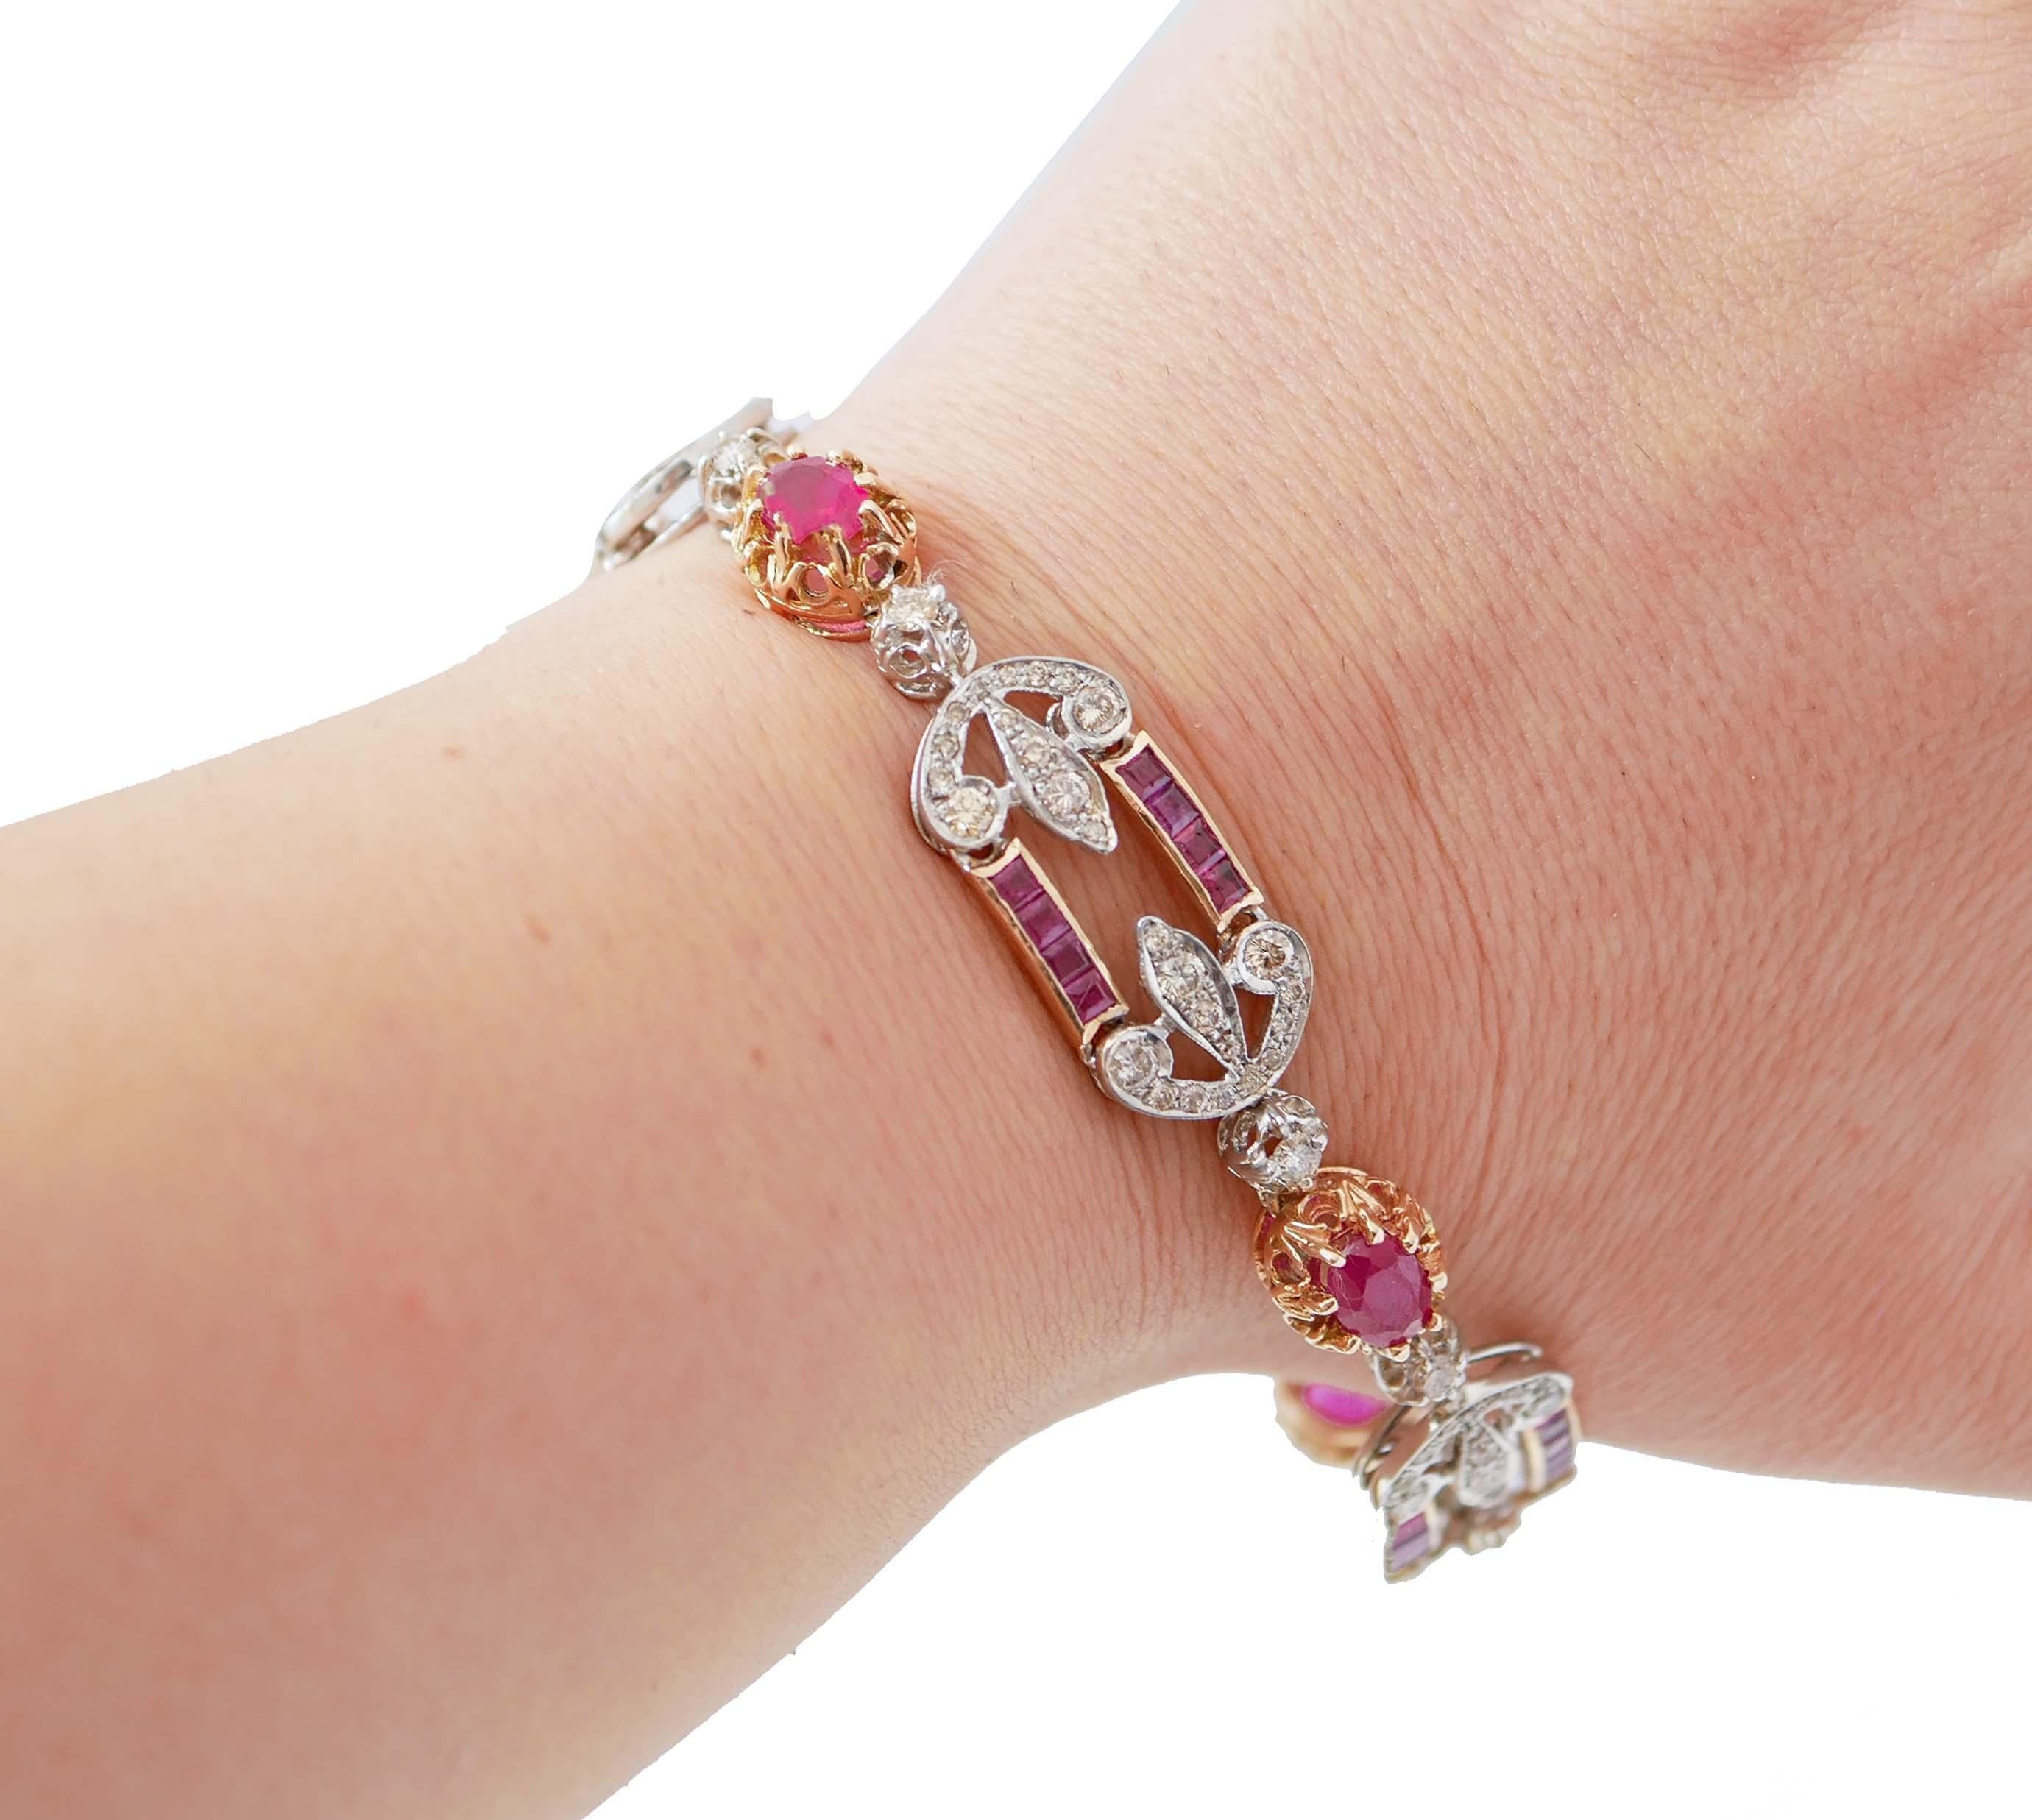 Rubies, Diamonds, 14 Karat Rose Gold and Silver Bracelet. In Good Condition For Sale In Marcianise, Marcianise (CE)